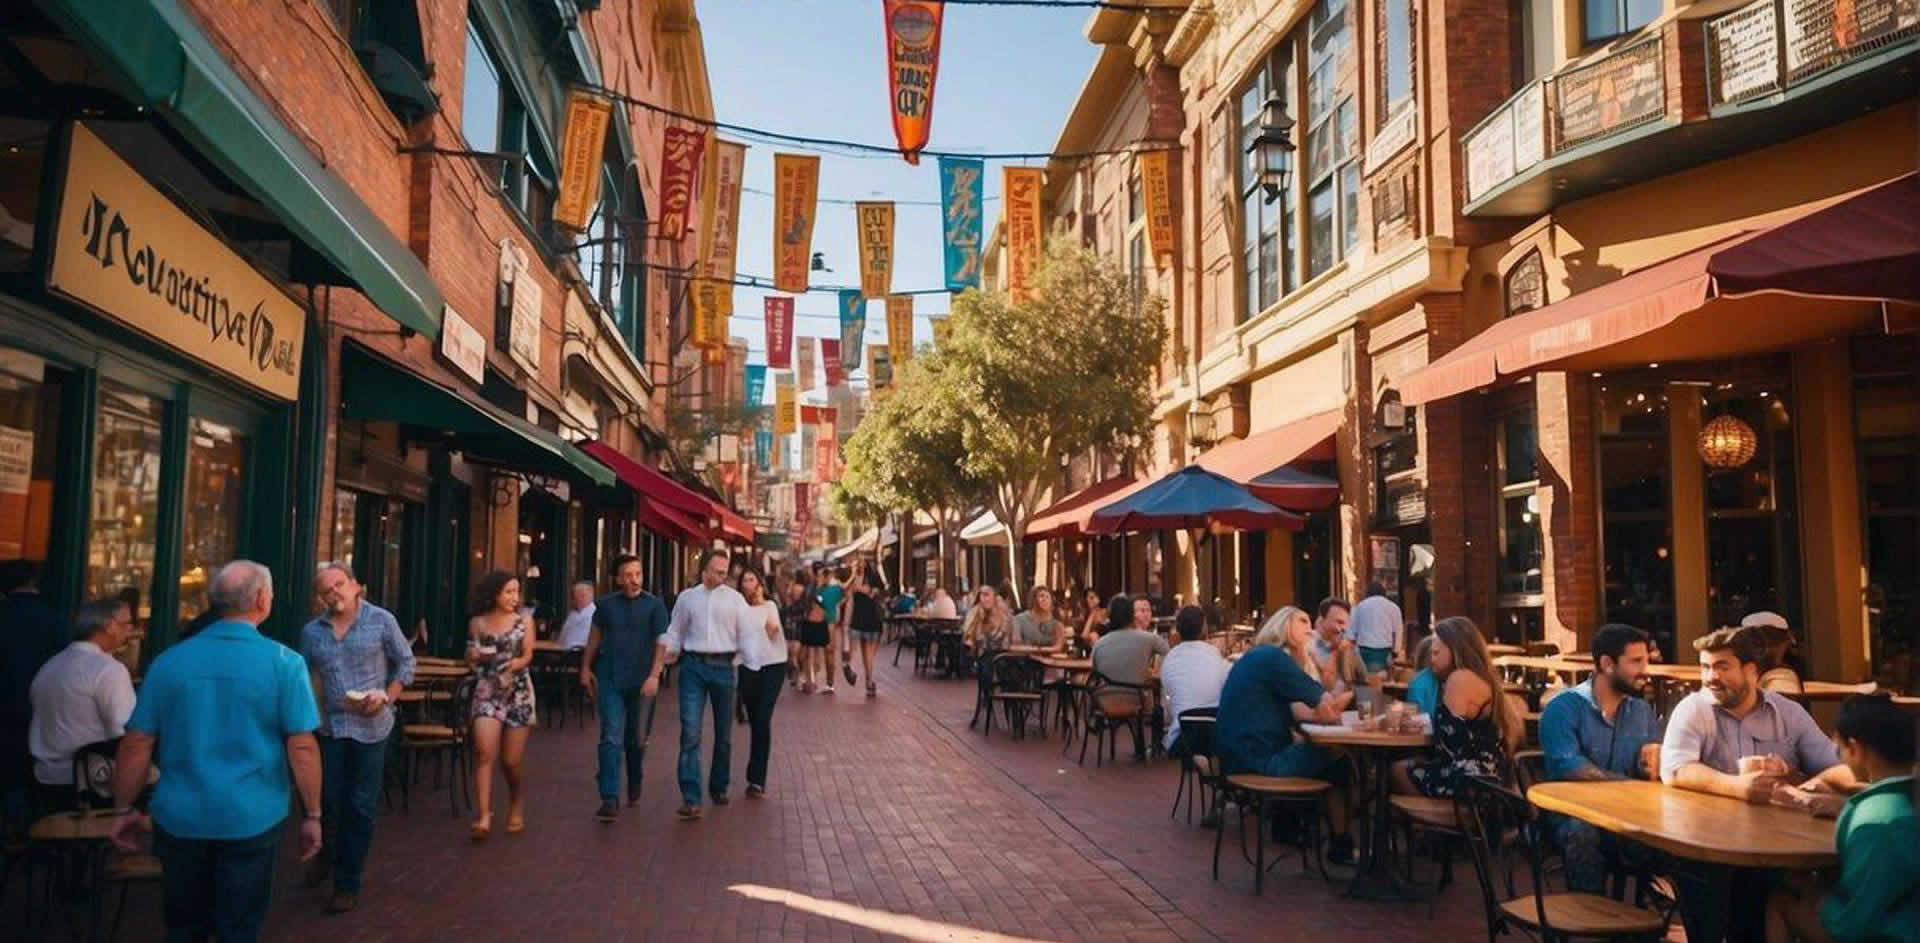 Colorful signs line the bustling streets of Gaslamp Quarter, San Diego. Outdoor cafes, historic buildings, and lively entertainment create a vibrant atmosphere